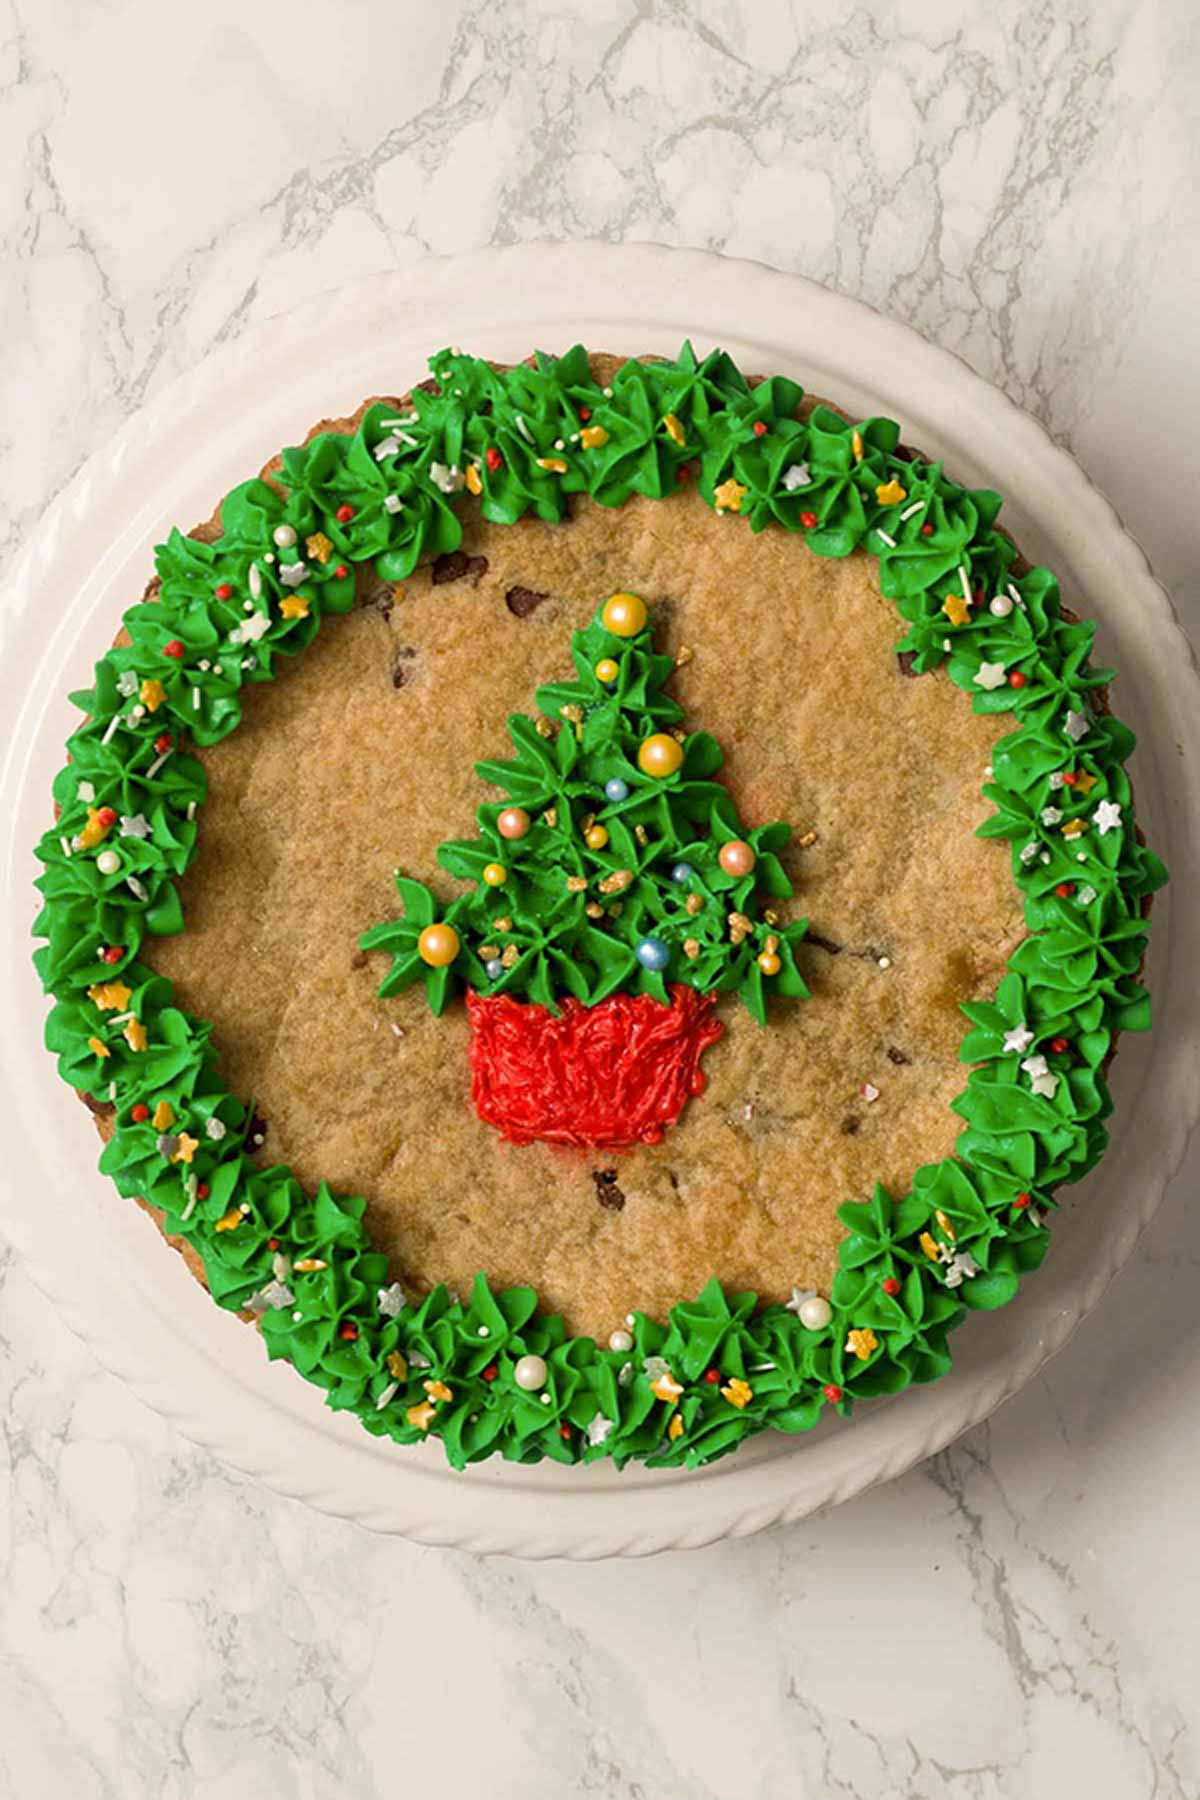 Vegan Cookie Cake With Green Icing On Top